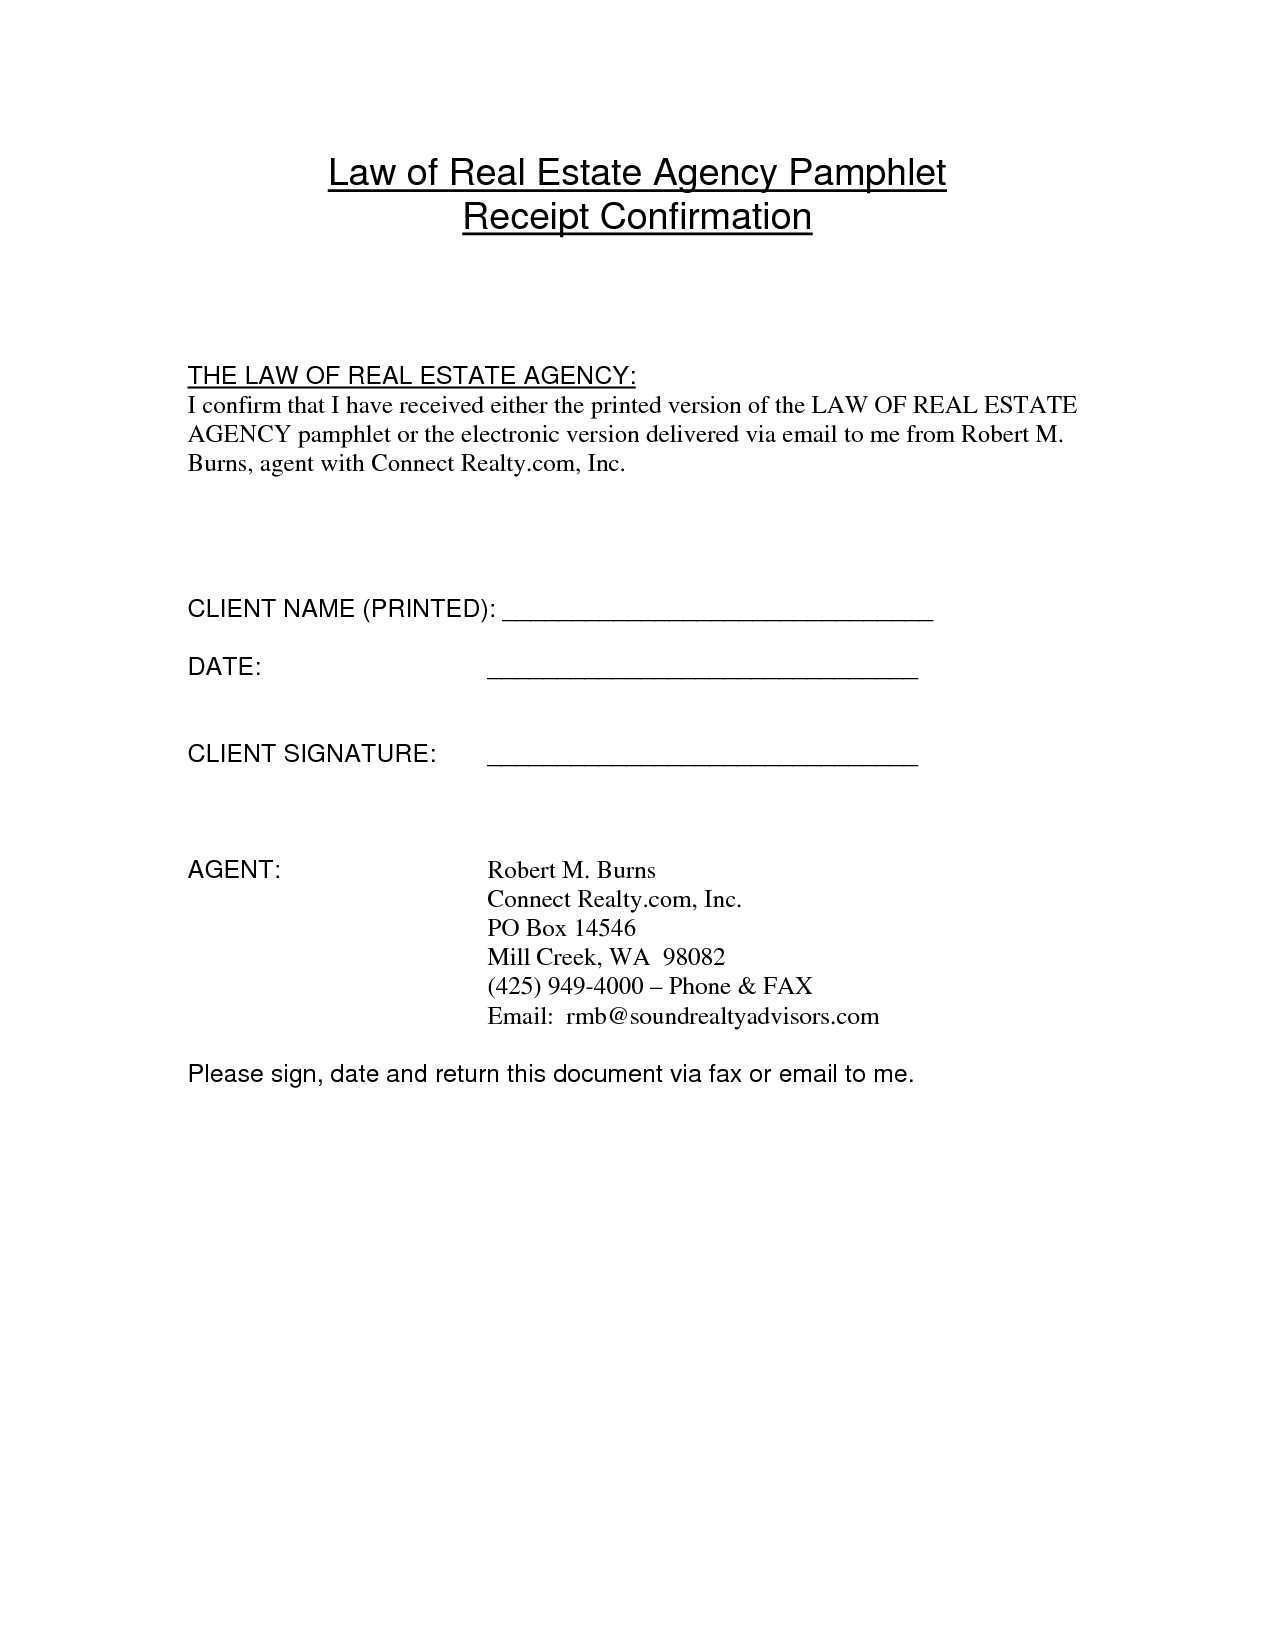 Fax Confirmation Template from legaldbol.com